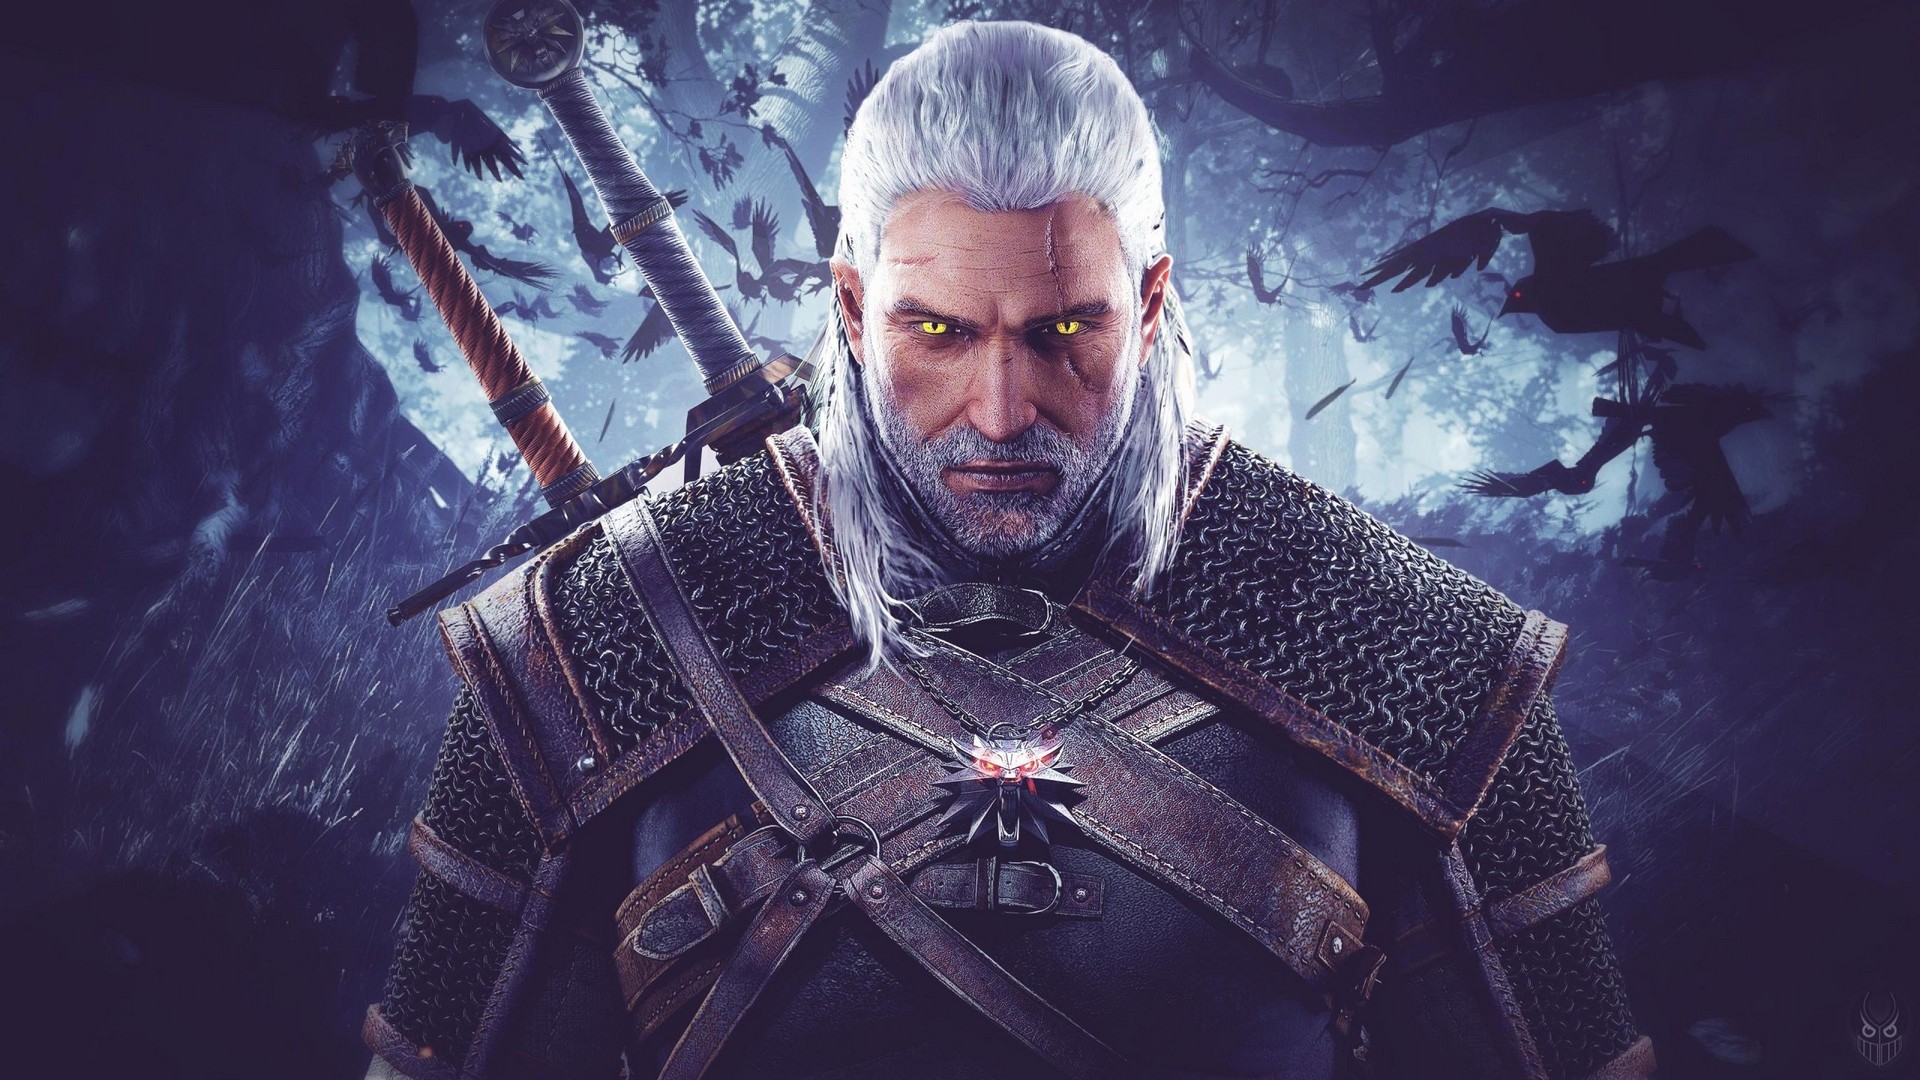 The Witcher Wild Hunt Trailer Wallpaper with high-resolution 1920x1080 pixel. You can use this poster wallpaper for your Desktop Computers, Mac Screensavers, Windows Backgrounds, iPhone Wallpapers, Tablet or Android Lock screen and another Mobile device